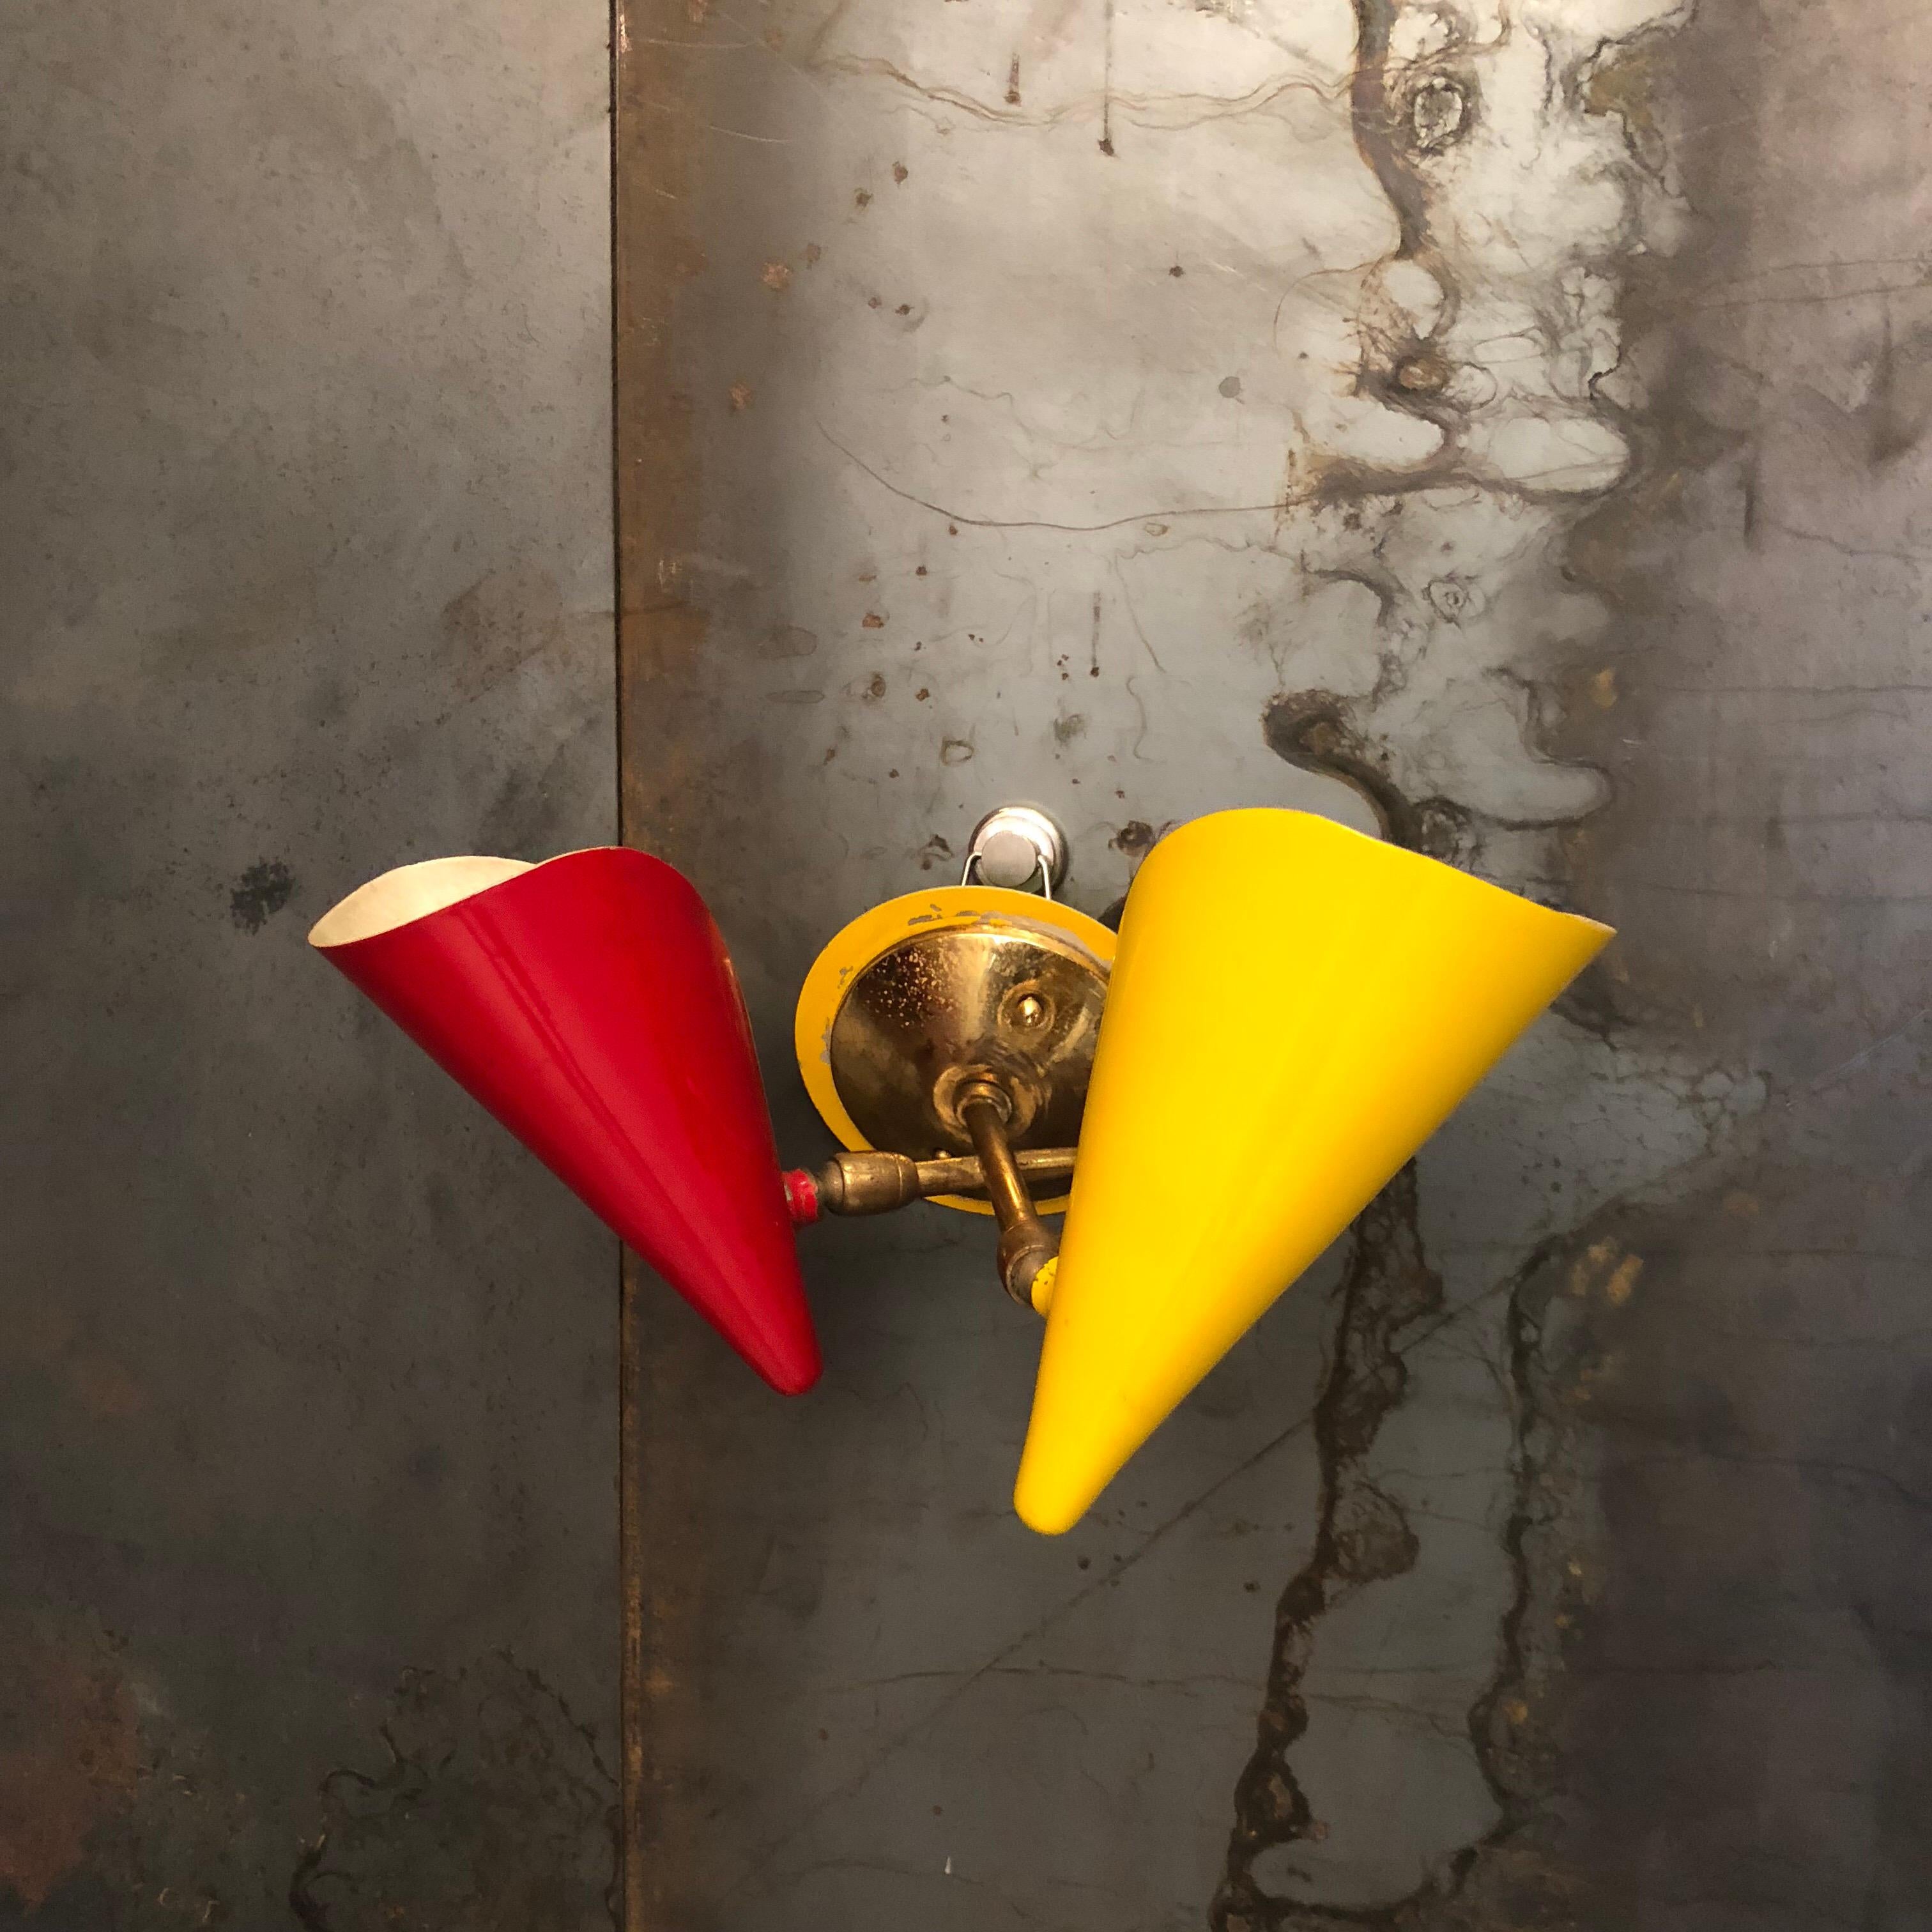 Mid-Century Modern Italian Stilnovo Brass and Lacquered Metal Sconces with Double Cones, 1950s For Sale